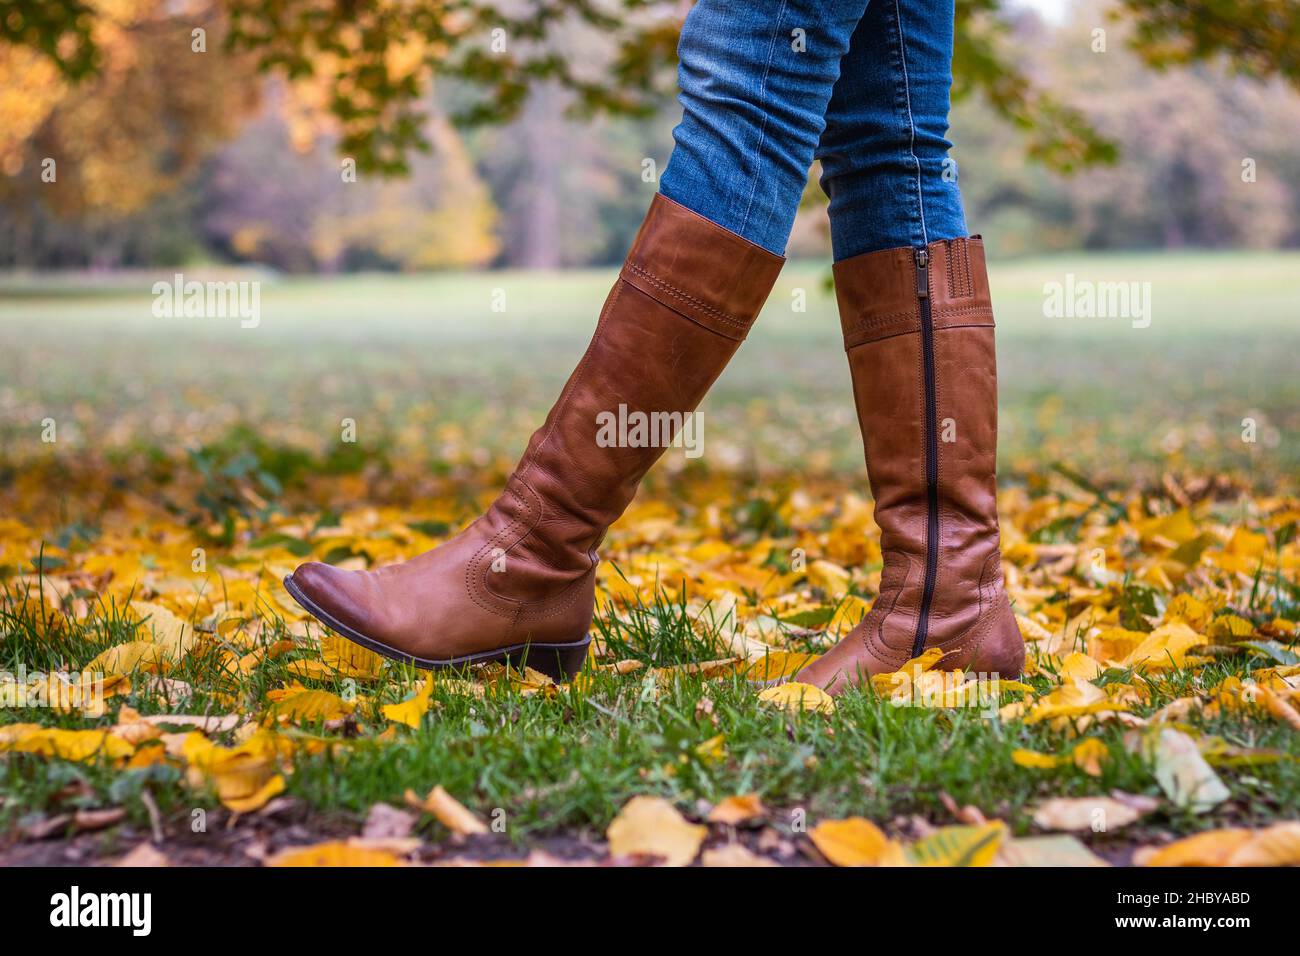 Woman wearing brown leather boot and walking in fallen leaves. Fashion model in autumn park Stock Photo